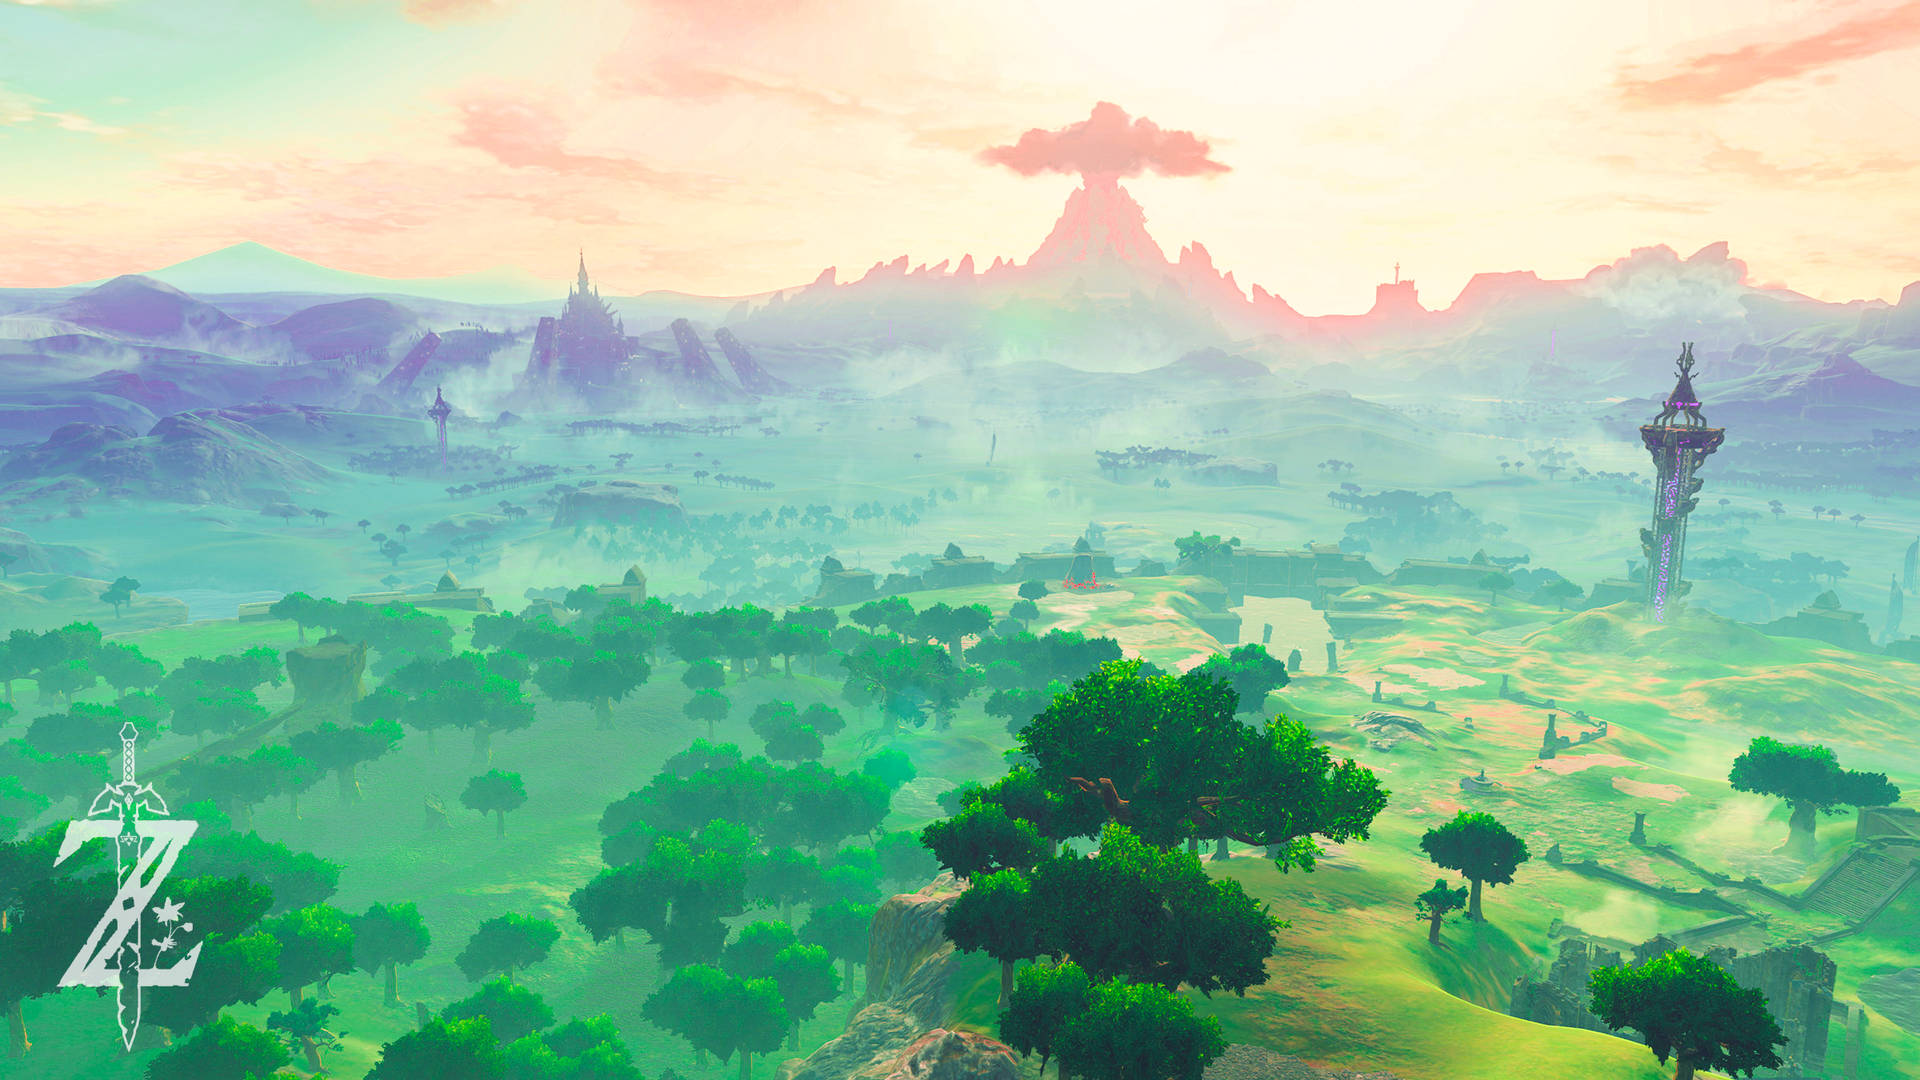 Explore the majestic and stunningly beautiful landscape of Hyrule from The Legend of Zelda: Breath Of The Wild Wallpaper